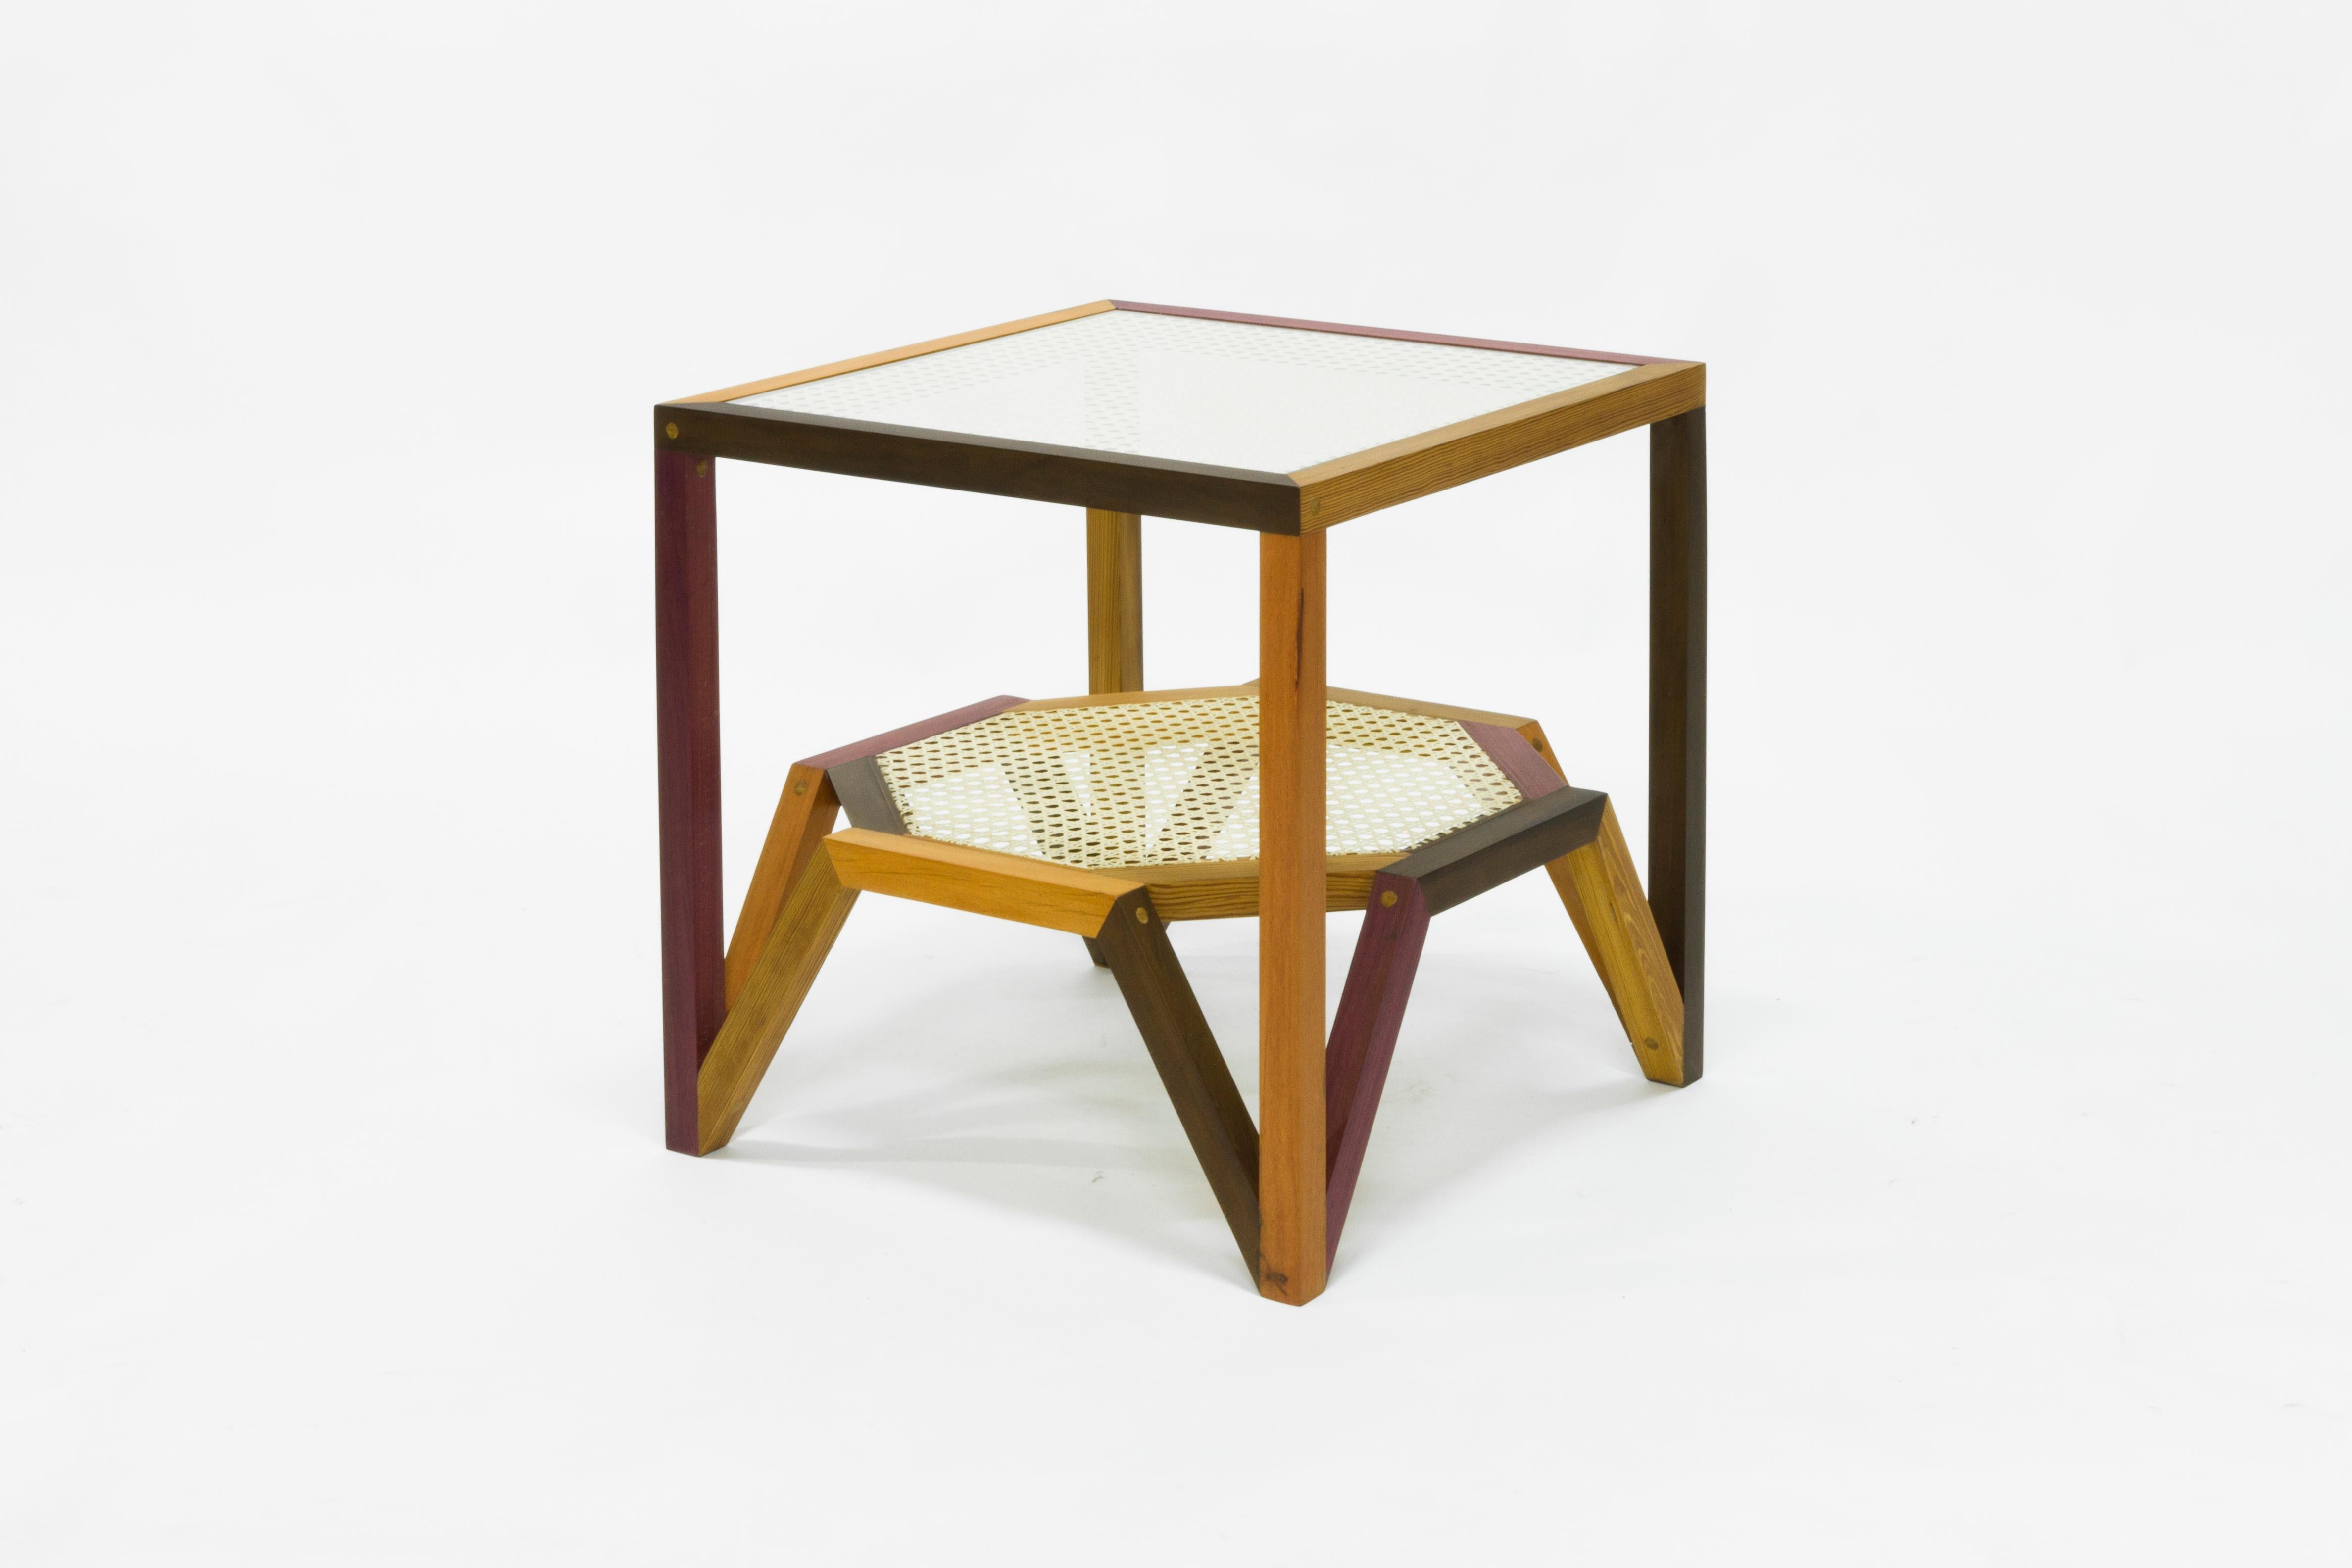 The side table was designed to simulate the moiré pattern, a visual effect that occurs when viewing a set of lines or dots that overlaps on another set of lines or dots, where the sets differ in size, angle, or spacing. In order to create this